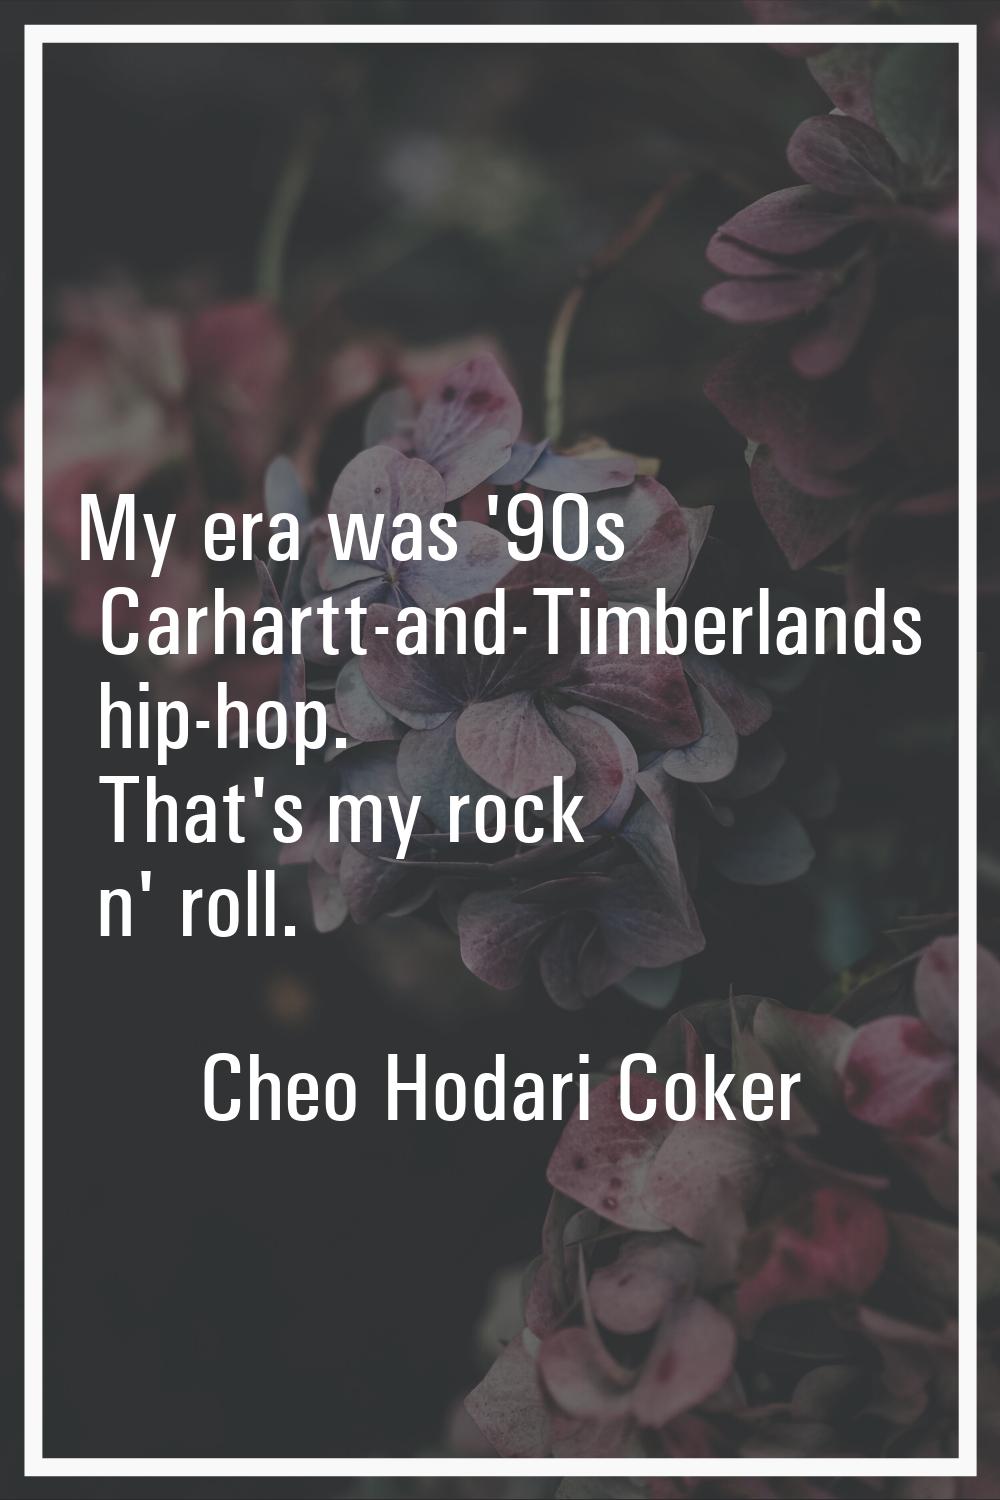 My era was '90s Carhartt-and-Timberlands hip-hop. That's my rock n' roll.